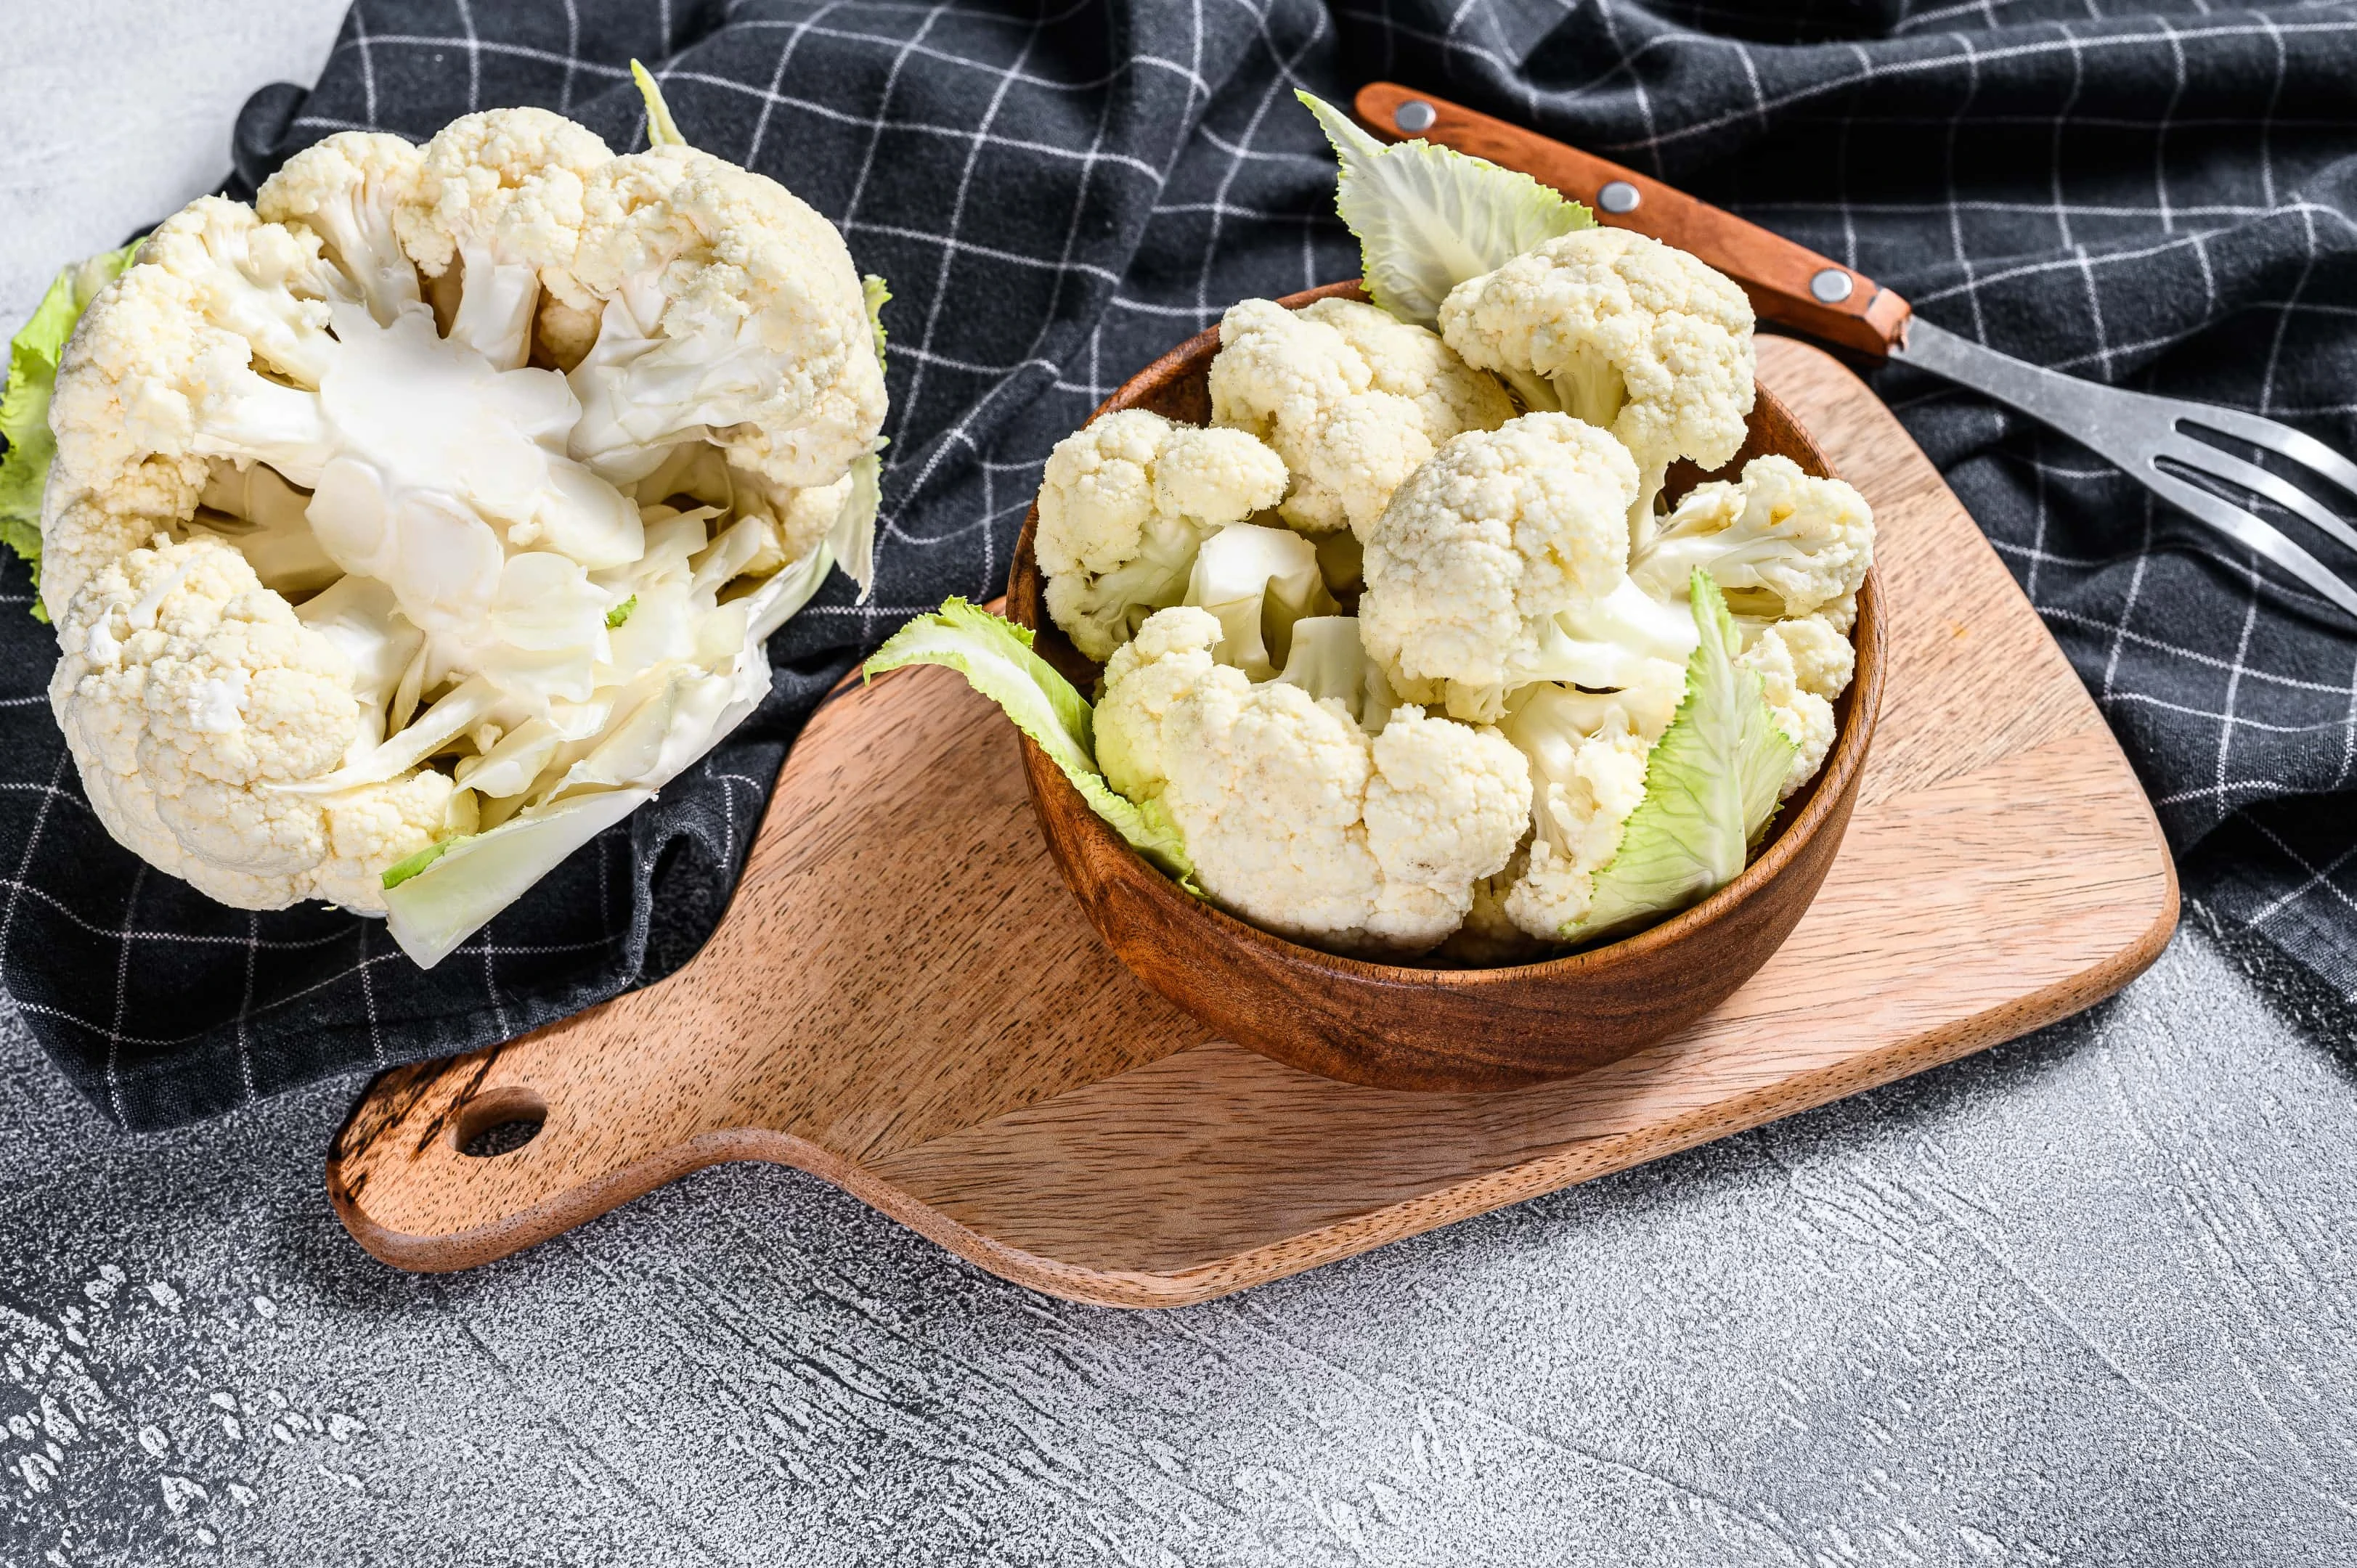 Fresh cauliflower cut into small pieces in wooden bowl